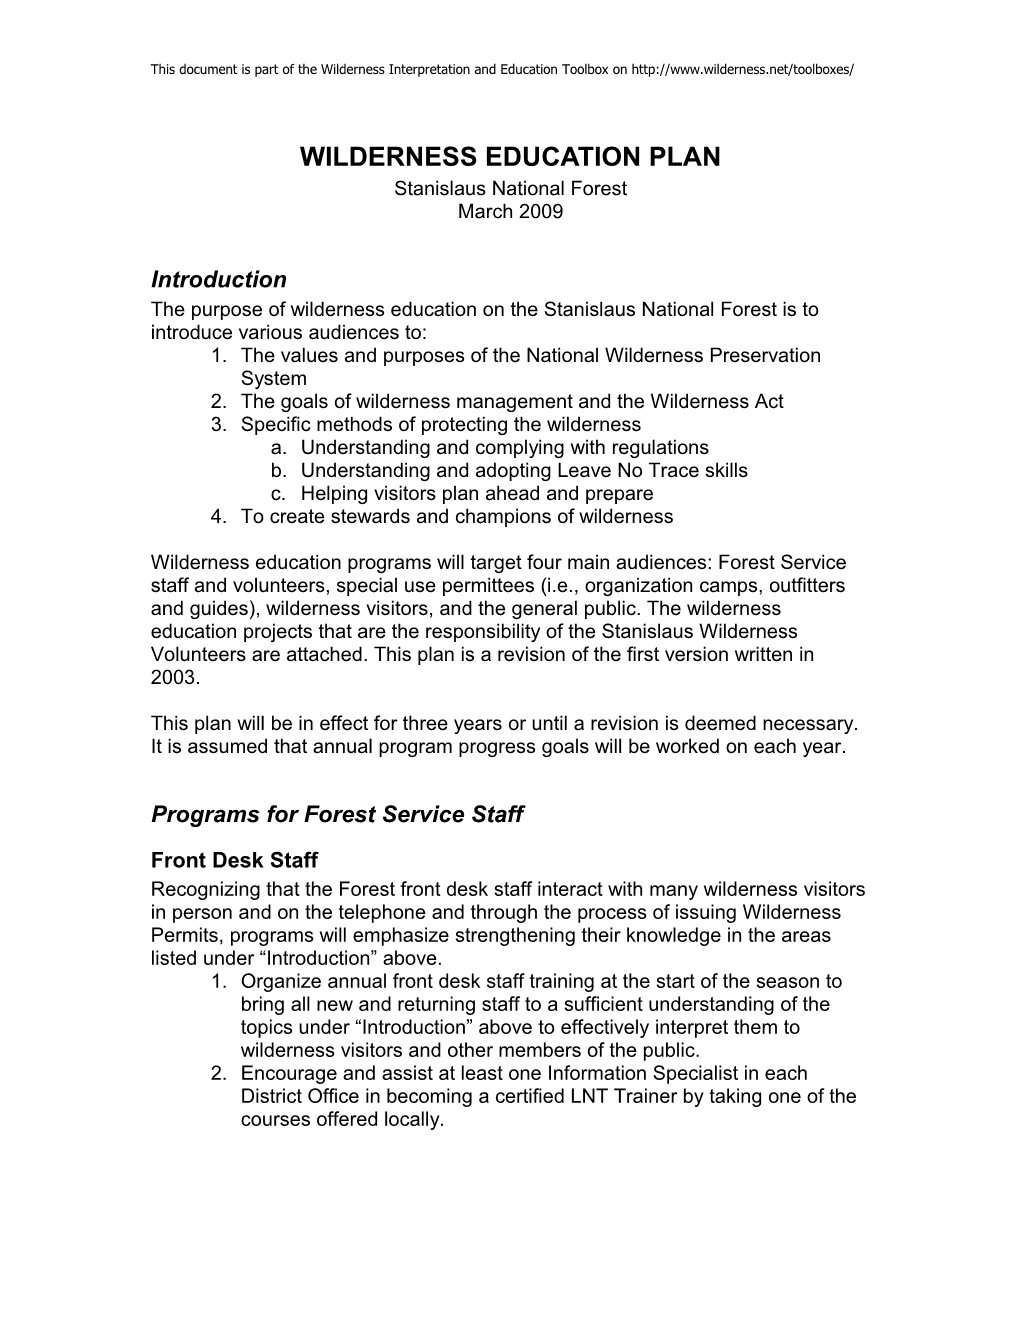 Stanislaus National Forest Wilderness Education Plan 2009